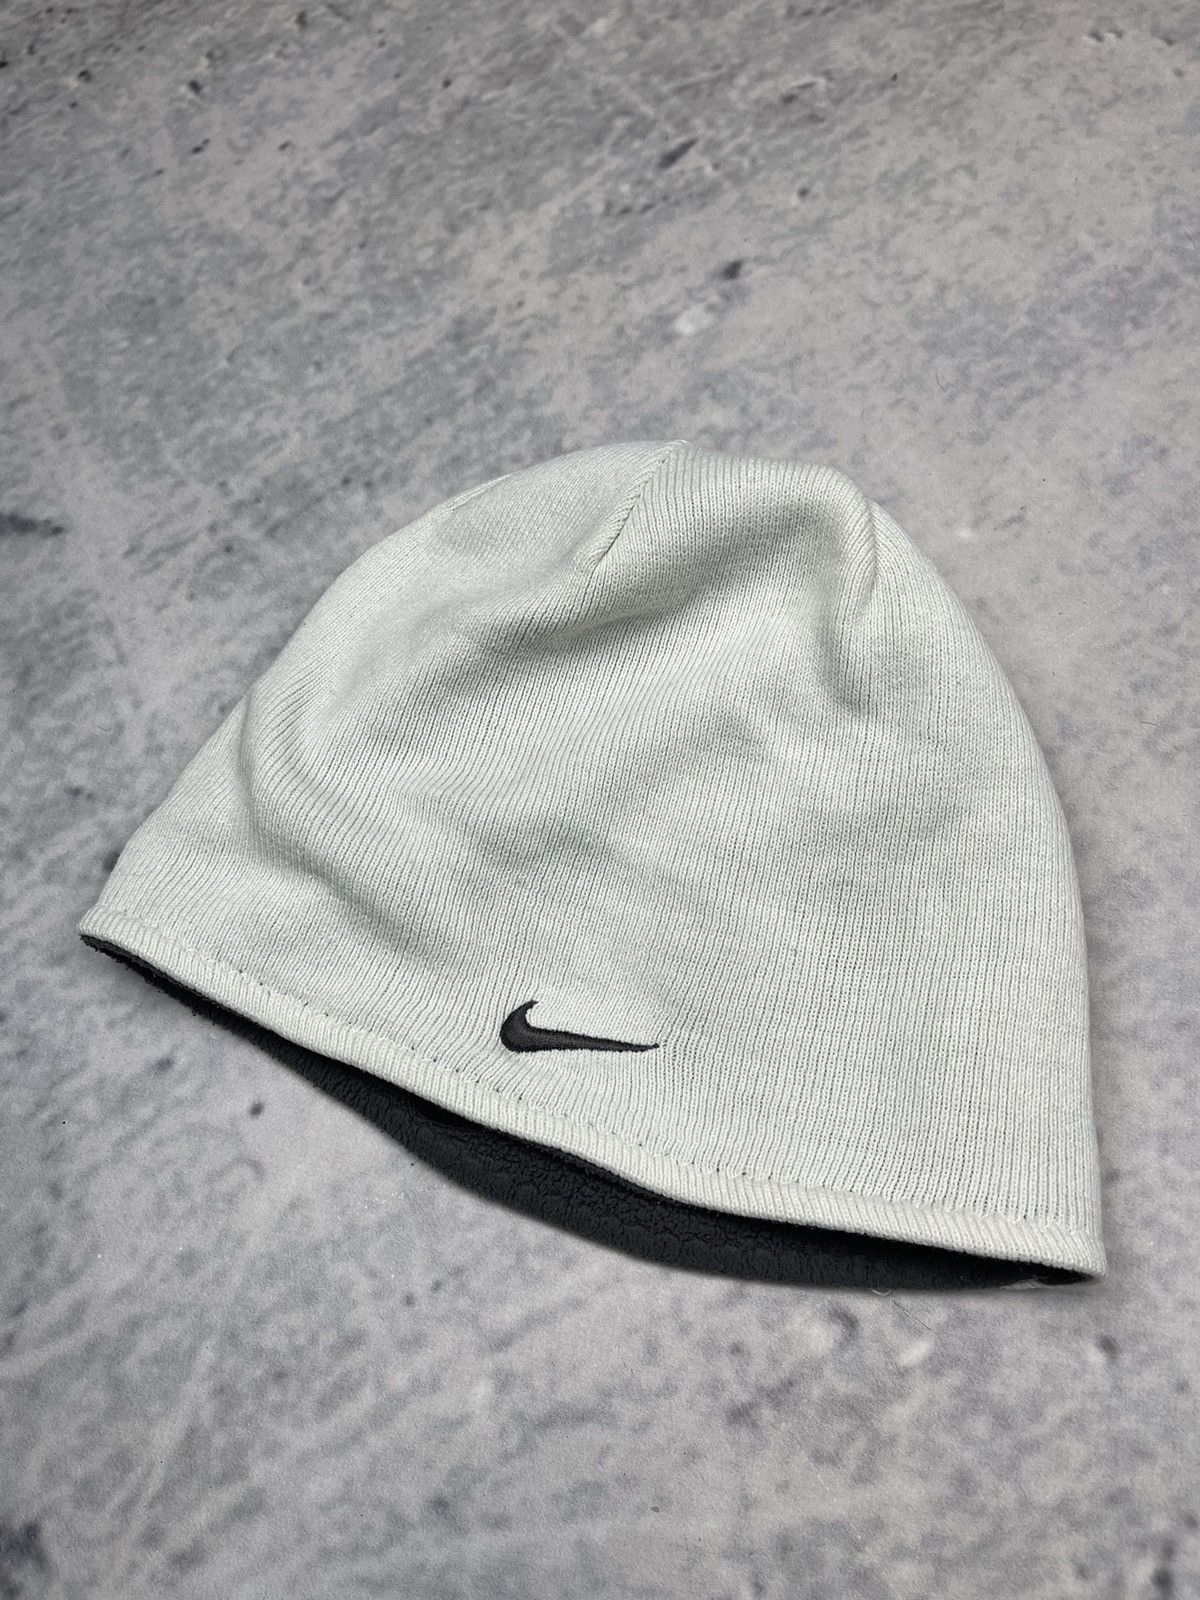 Nike Nike two sided hat vintage white/gray beanie Y2K | Grailed